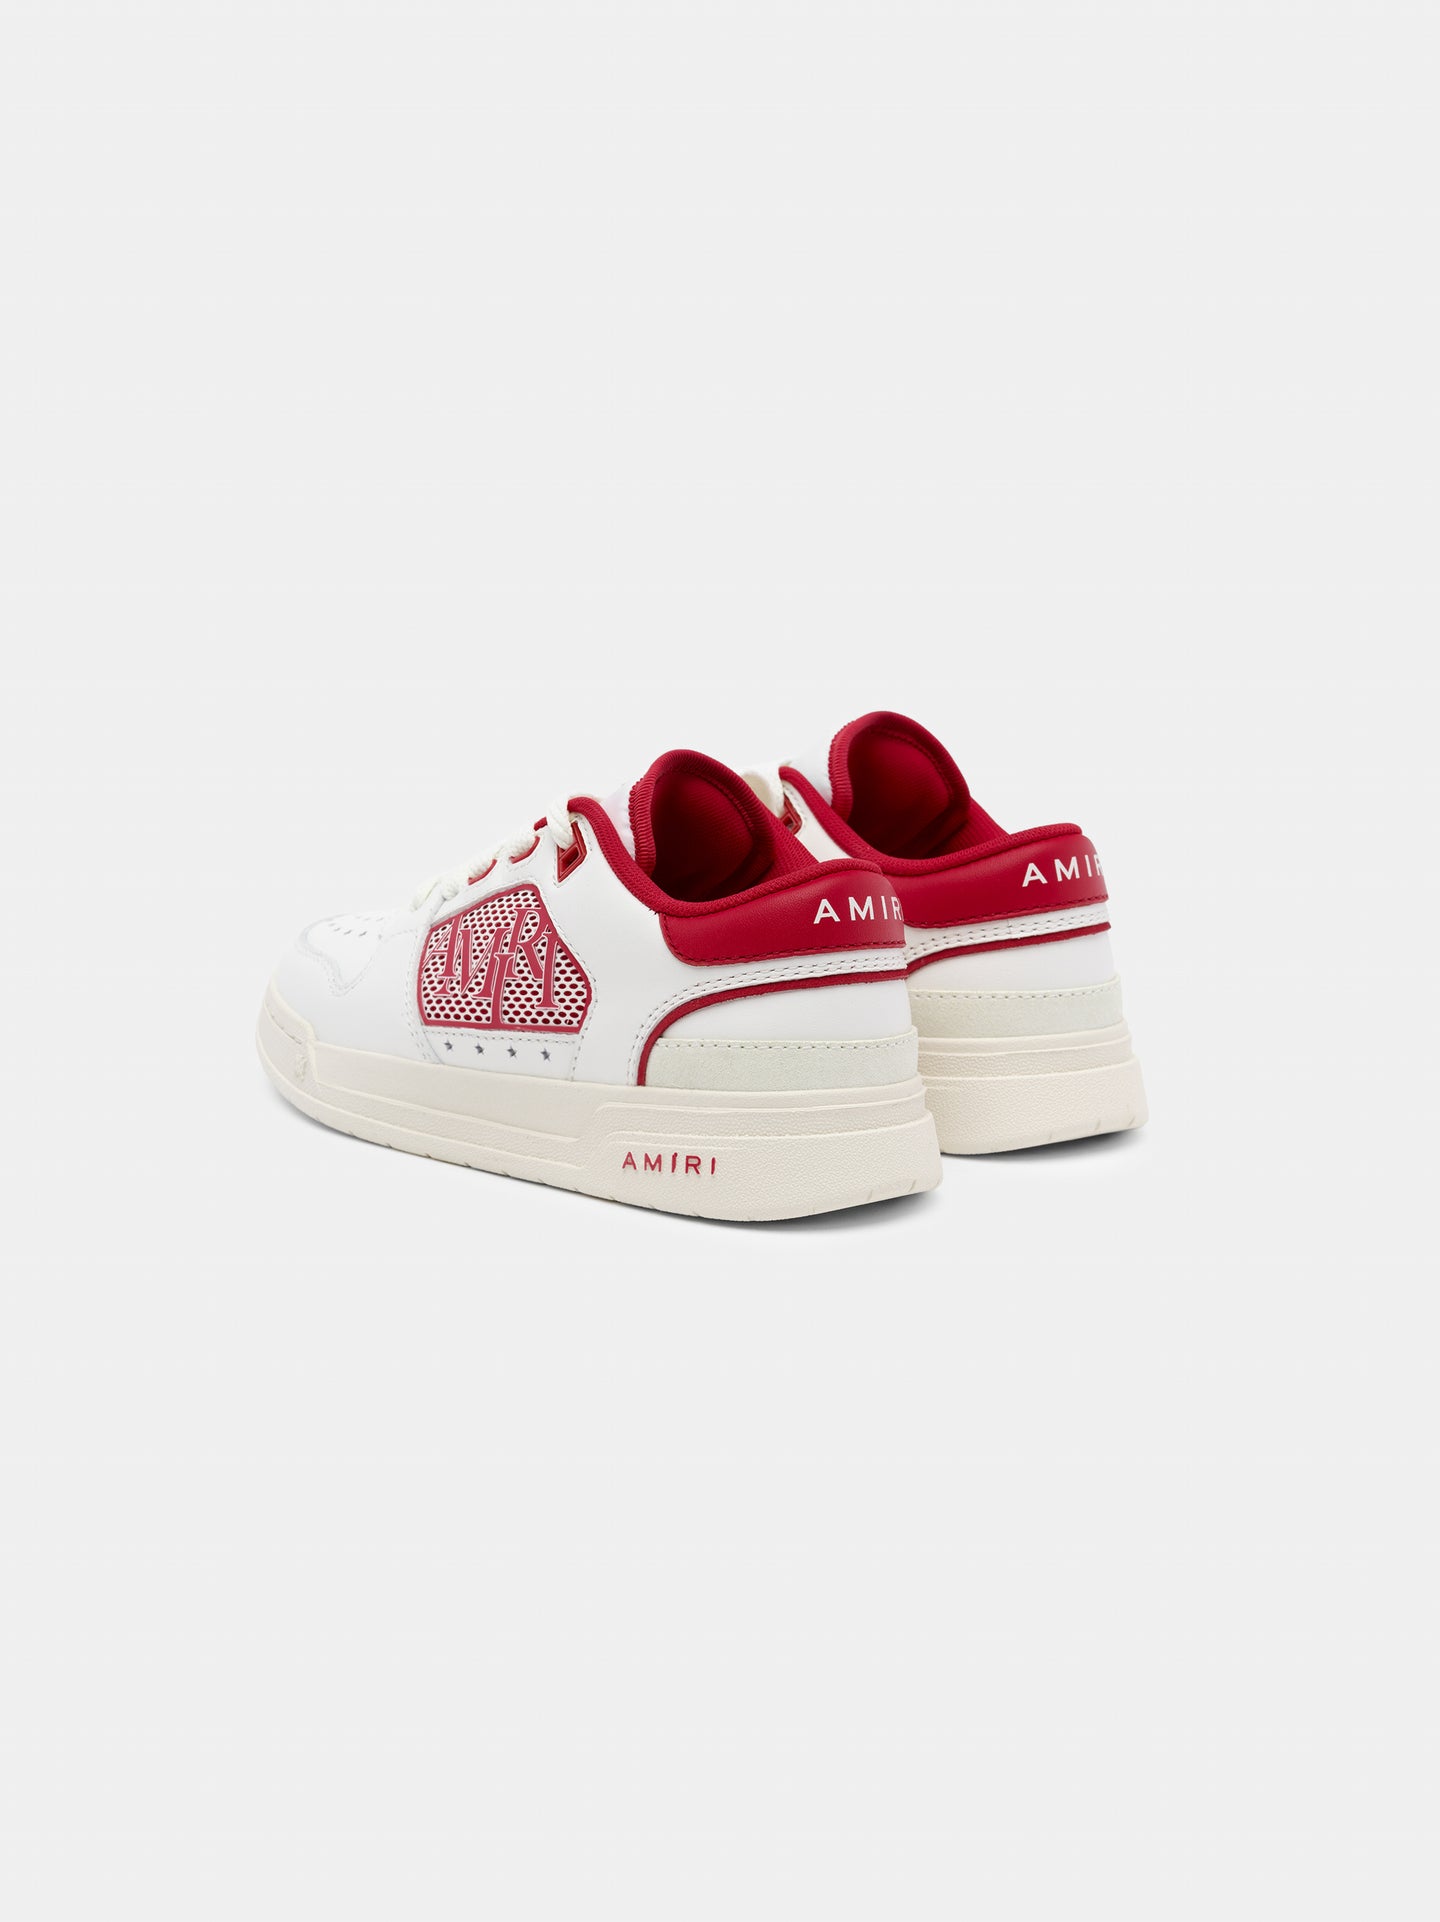 KIDS - CLASSIC LOW - White Red